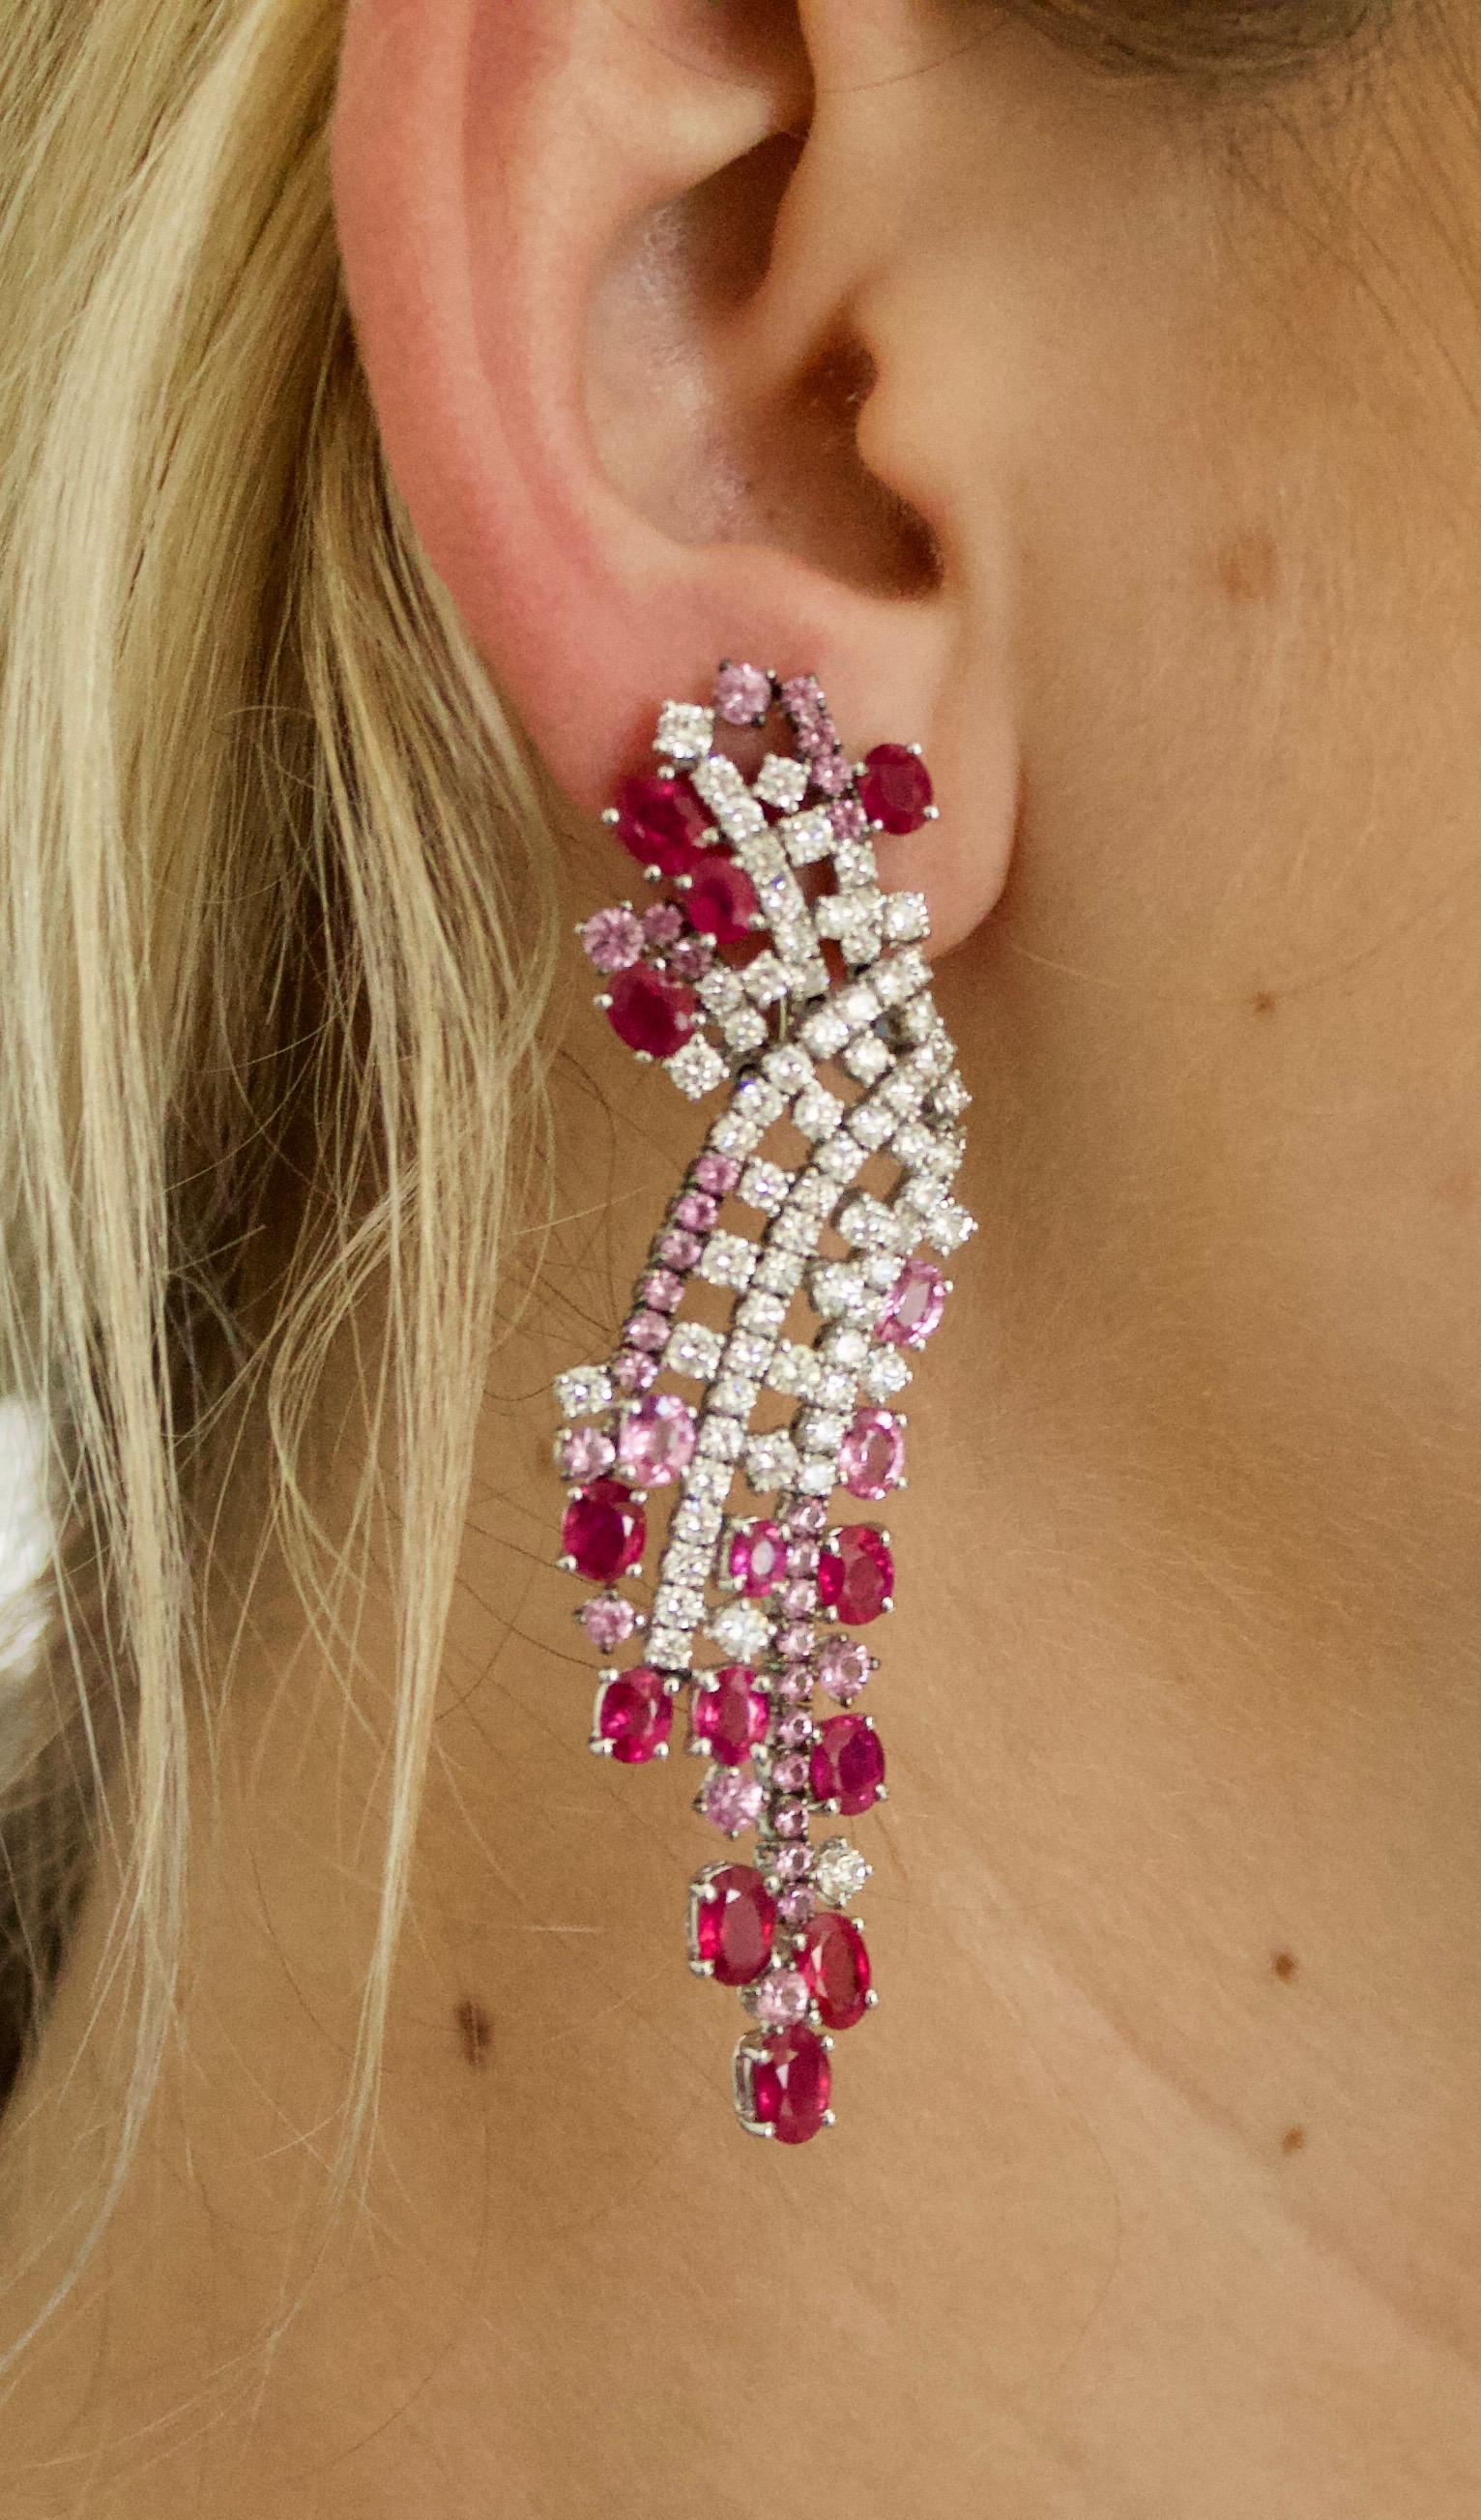 Waterfall Ruby and Pink Sapphire Diamond Earrings 
Twenty Six Cut Oval Rubies and Pink Sapphires weighing 13.03 carats approximately [bright with no imperfections visible to the naked eye]
Sixty Four Round Pink Sapphires  weighing 3.02 carats